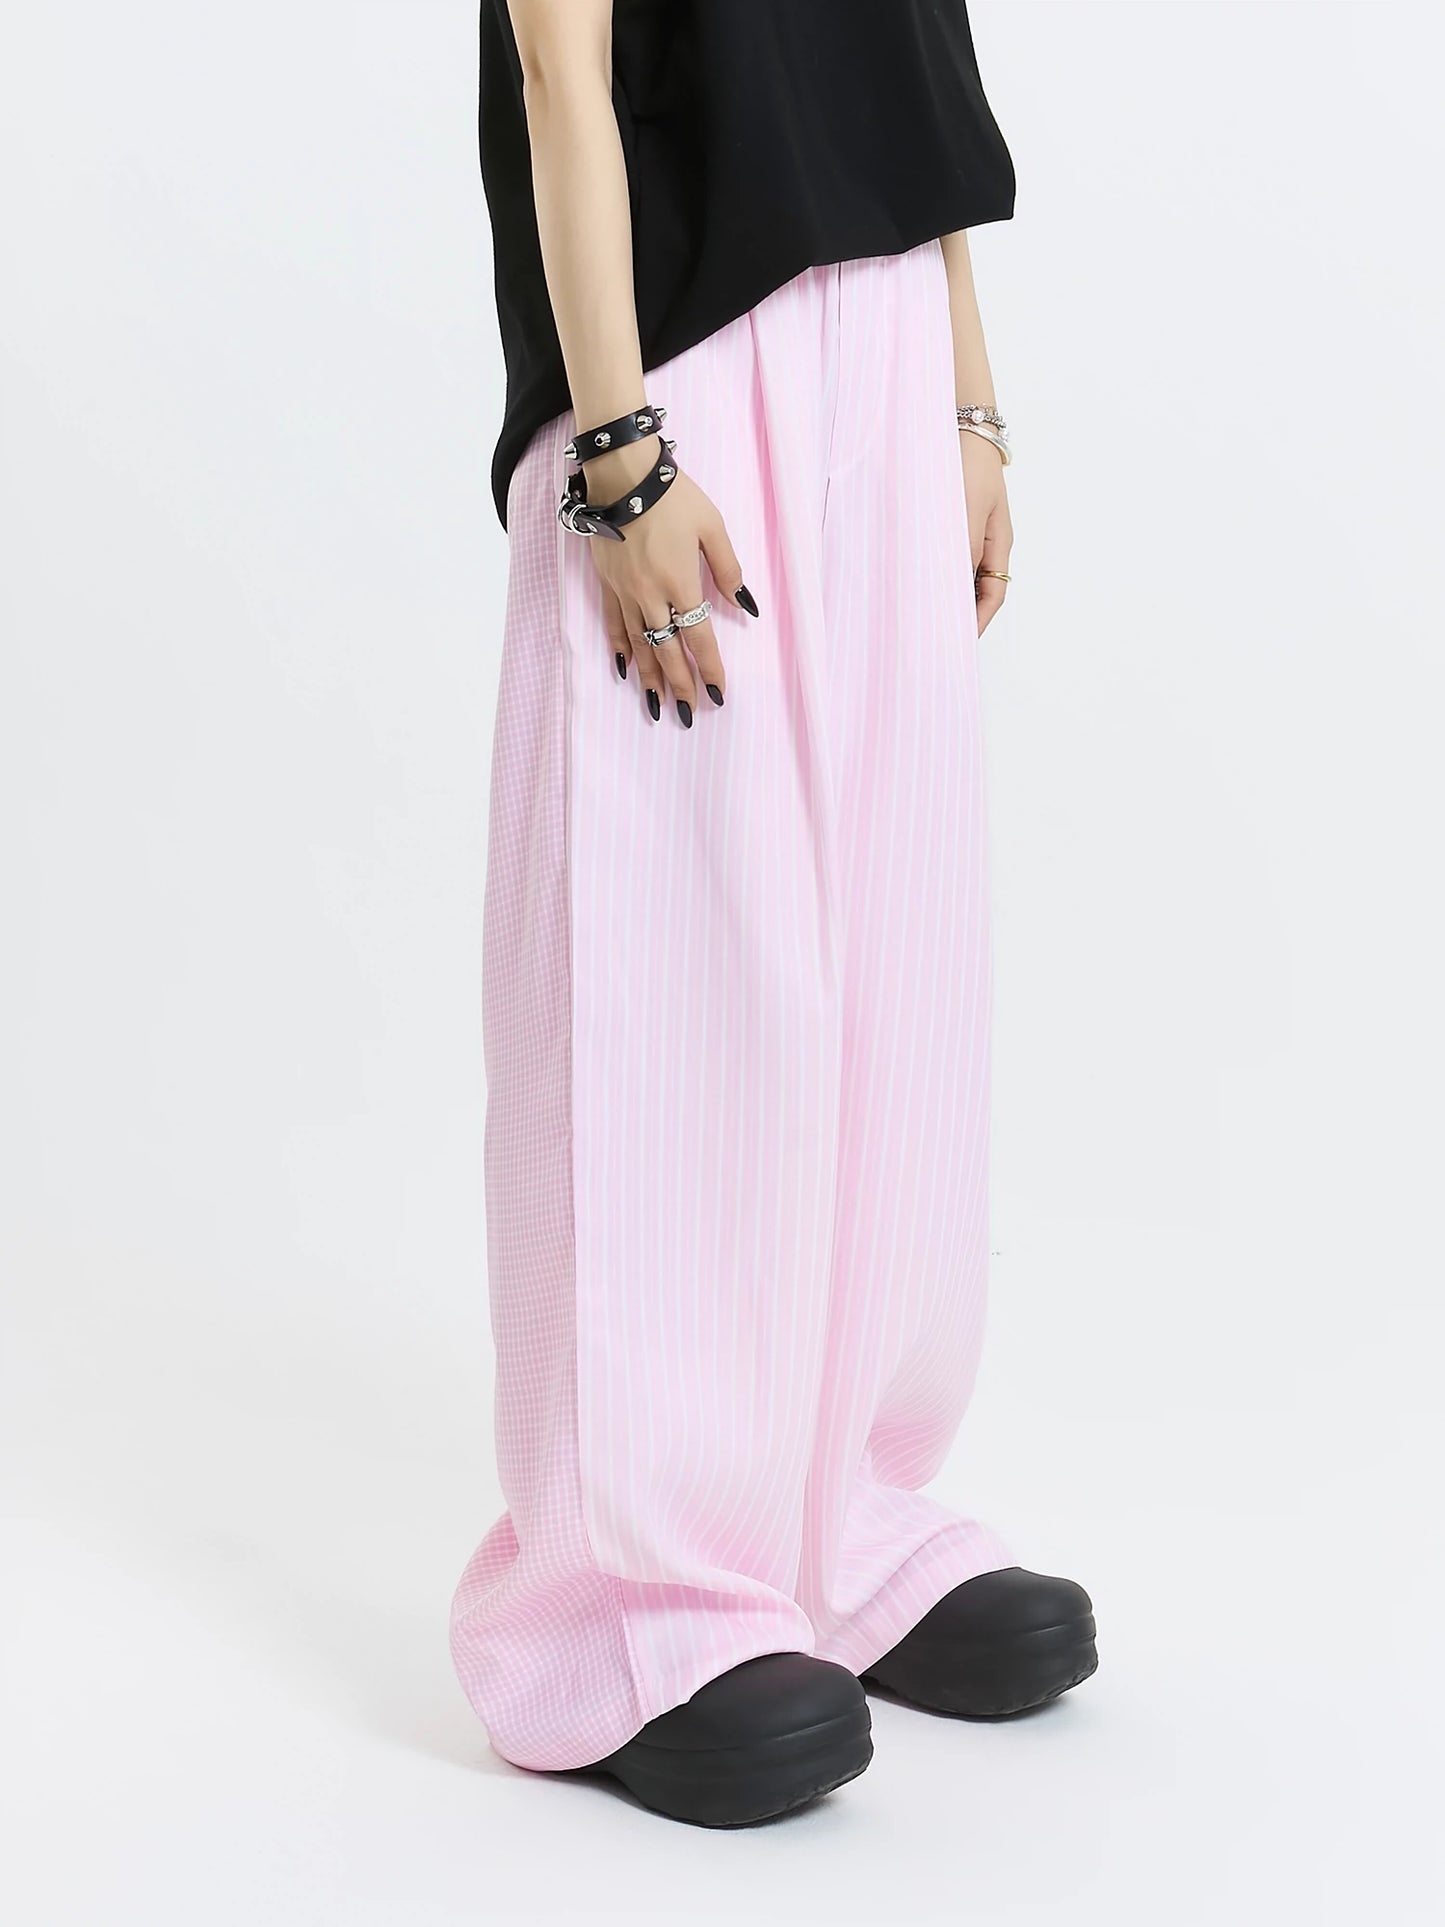 MICHINNYON blue/pink spring/summer casual striped loose slouchy elasticated waistband refreshing light color simple trousers